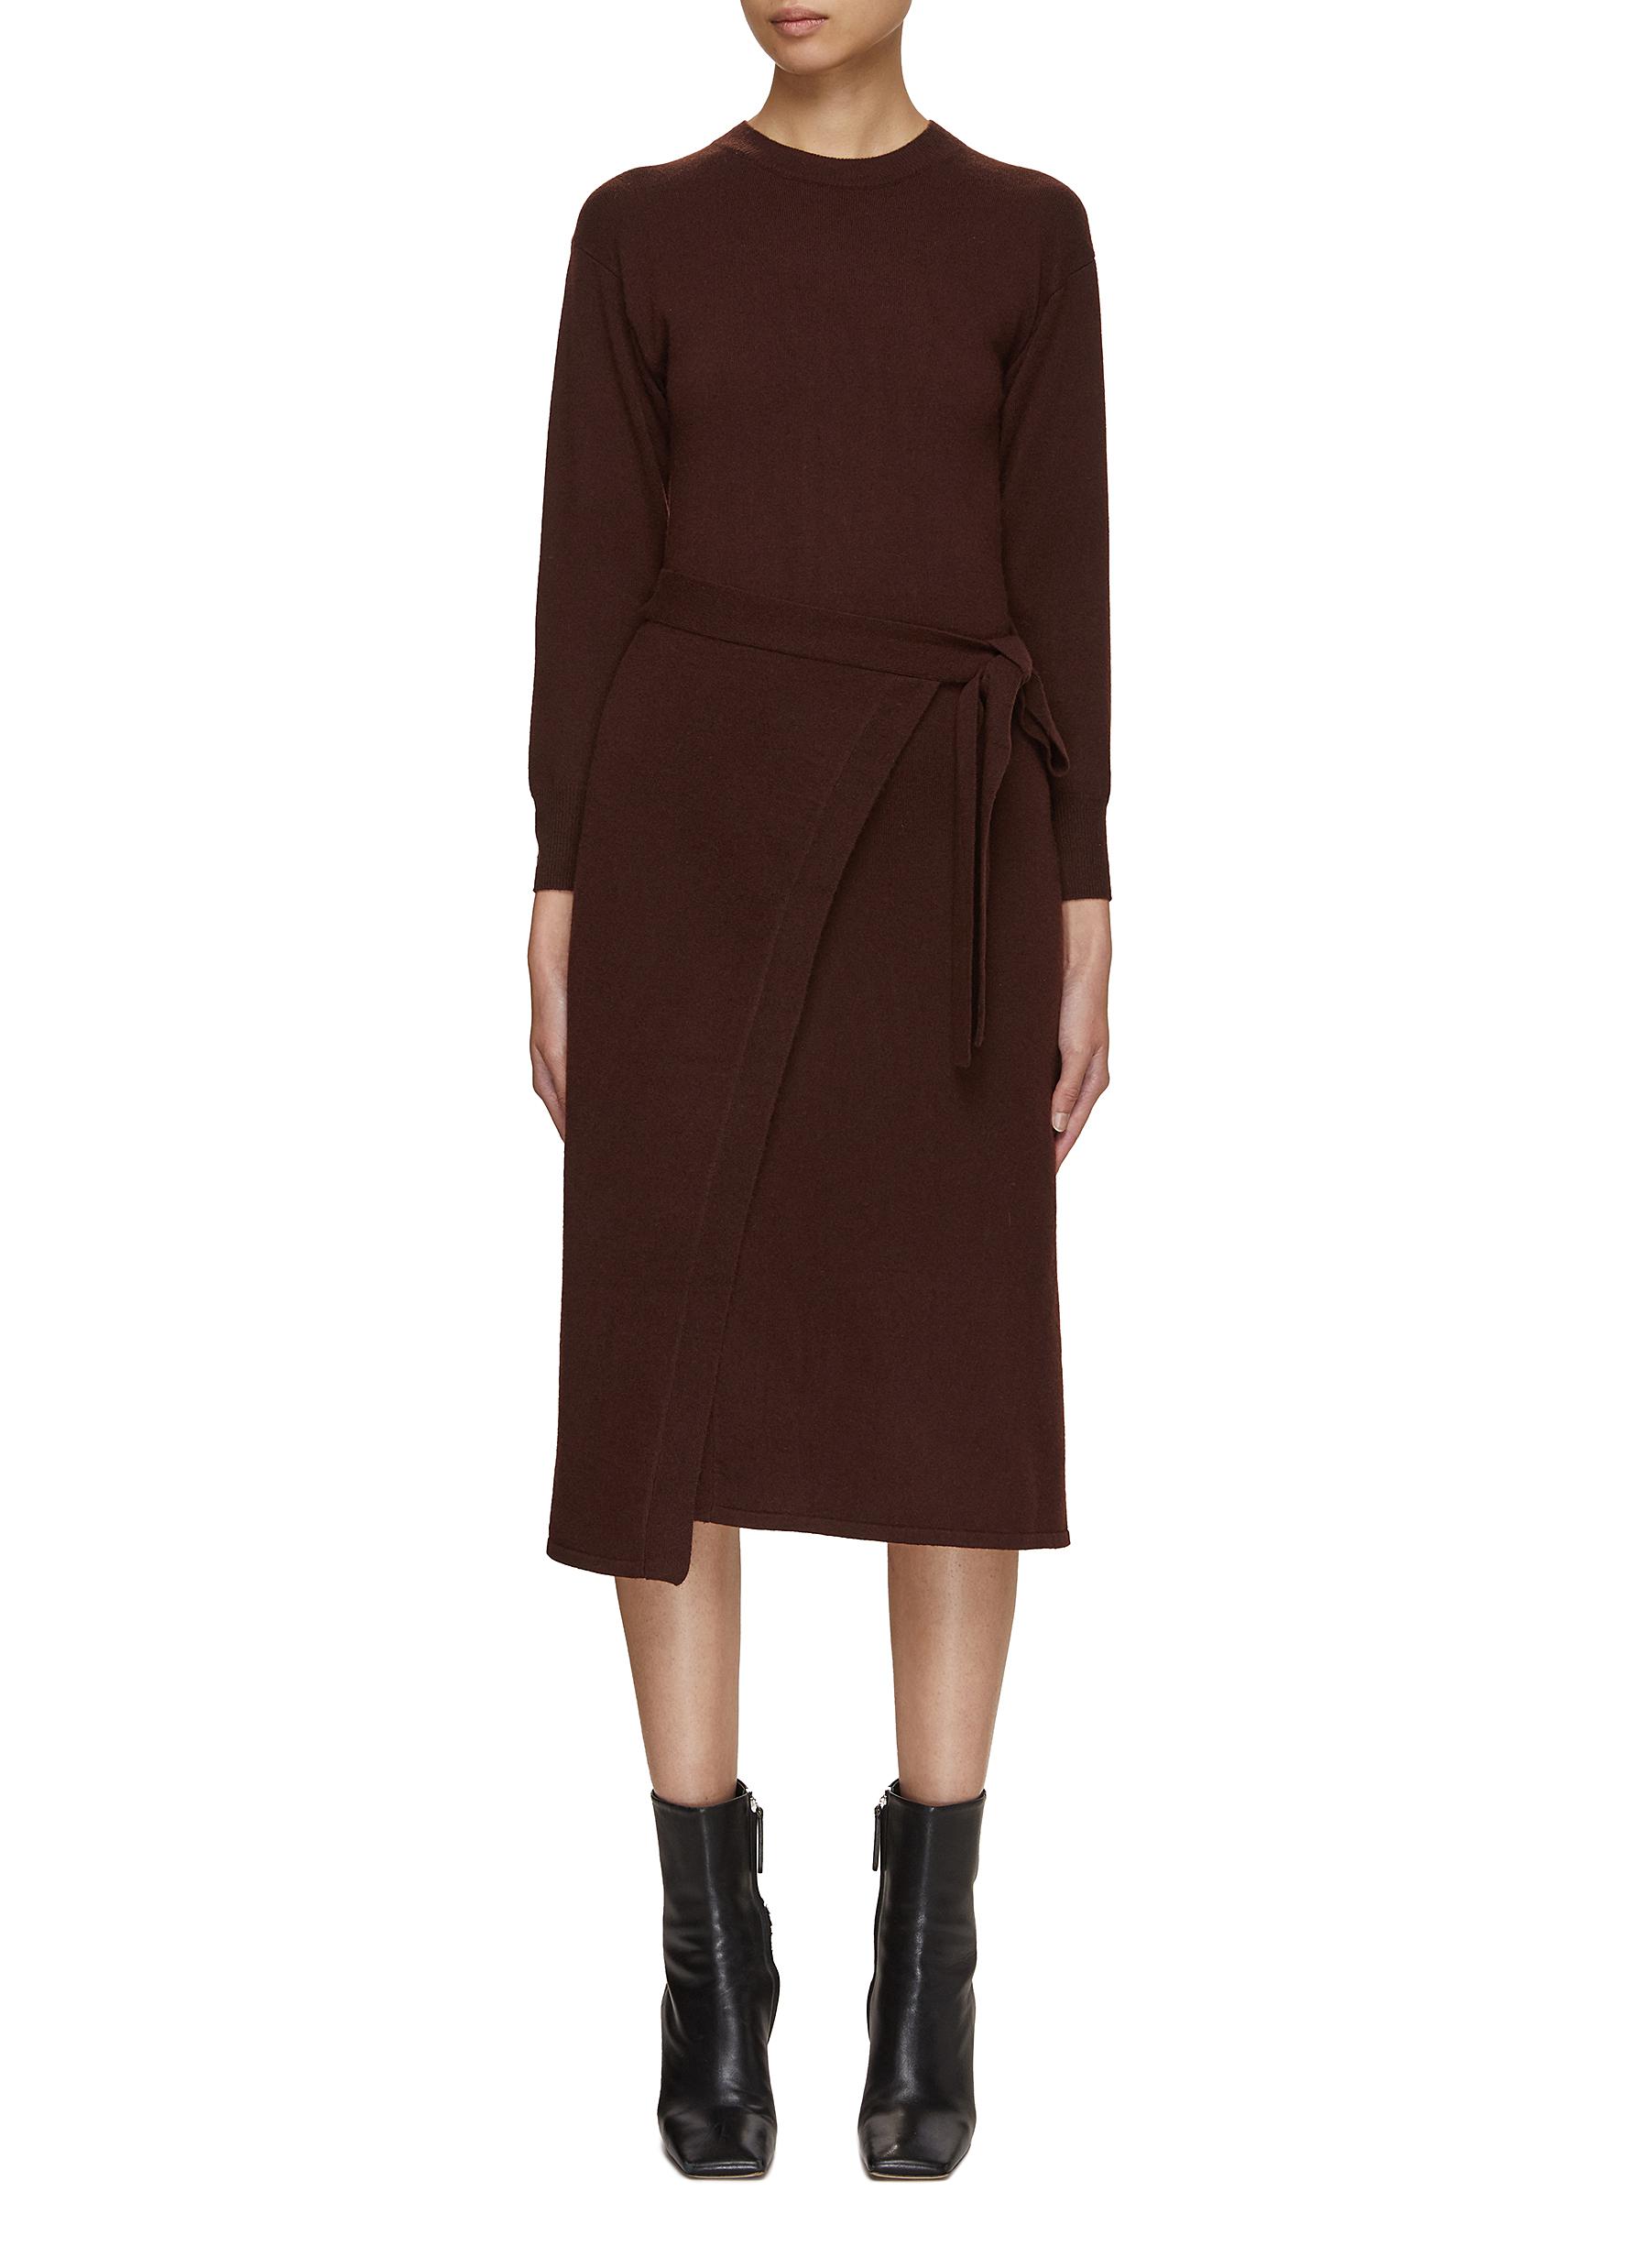 Belted Wool Cashmere Knit Dress